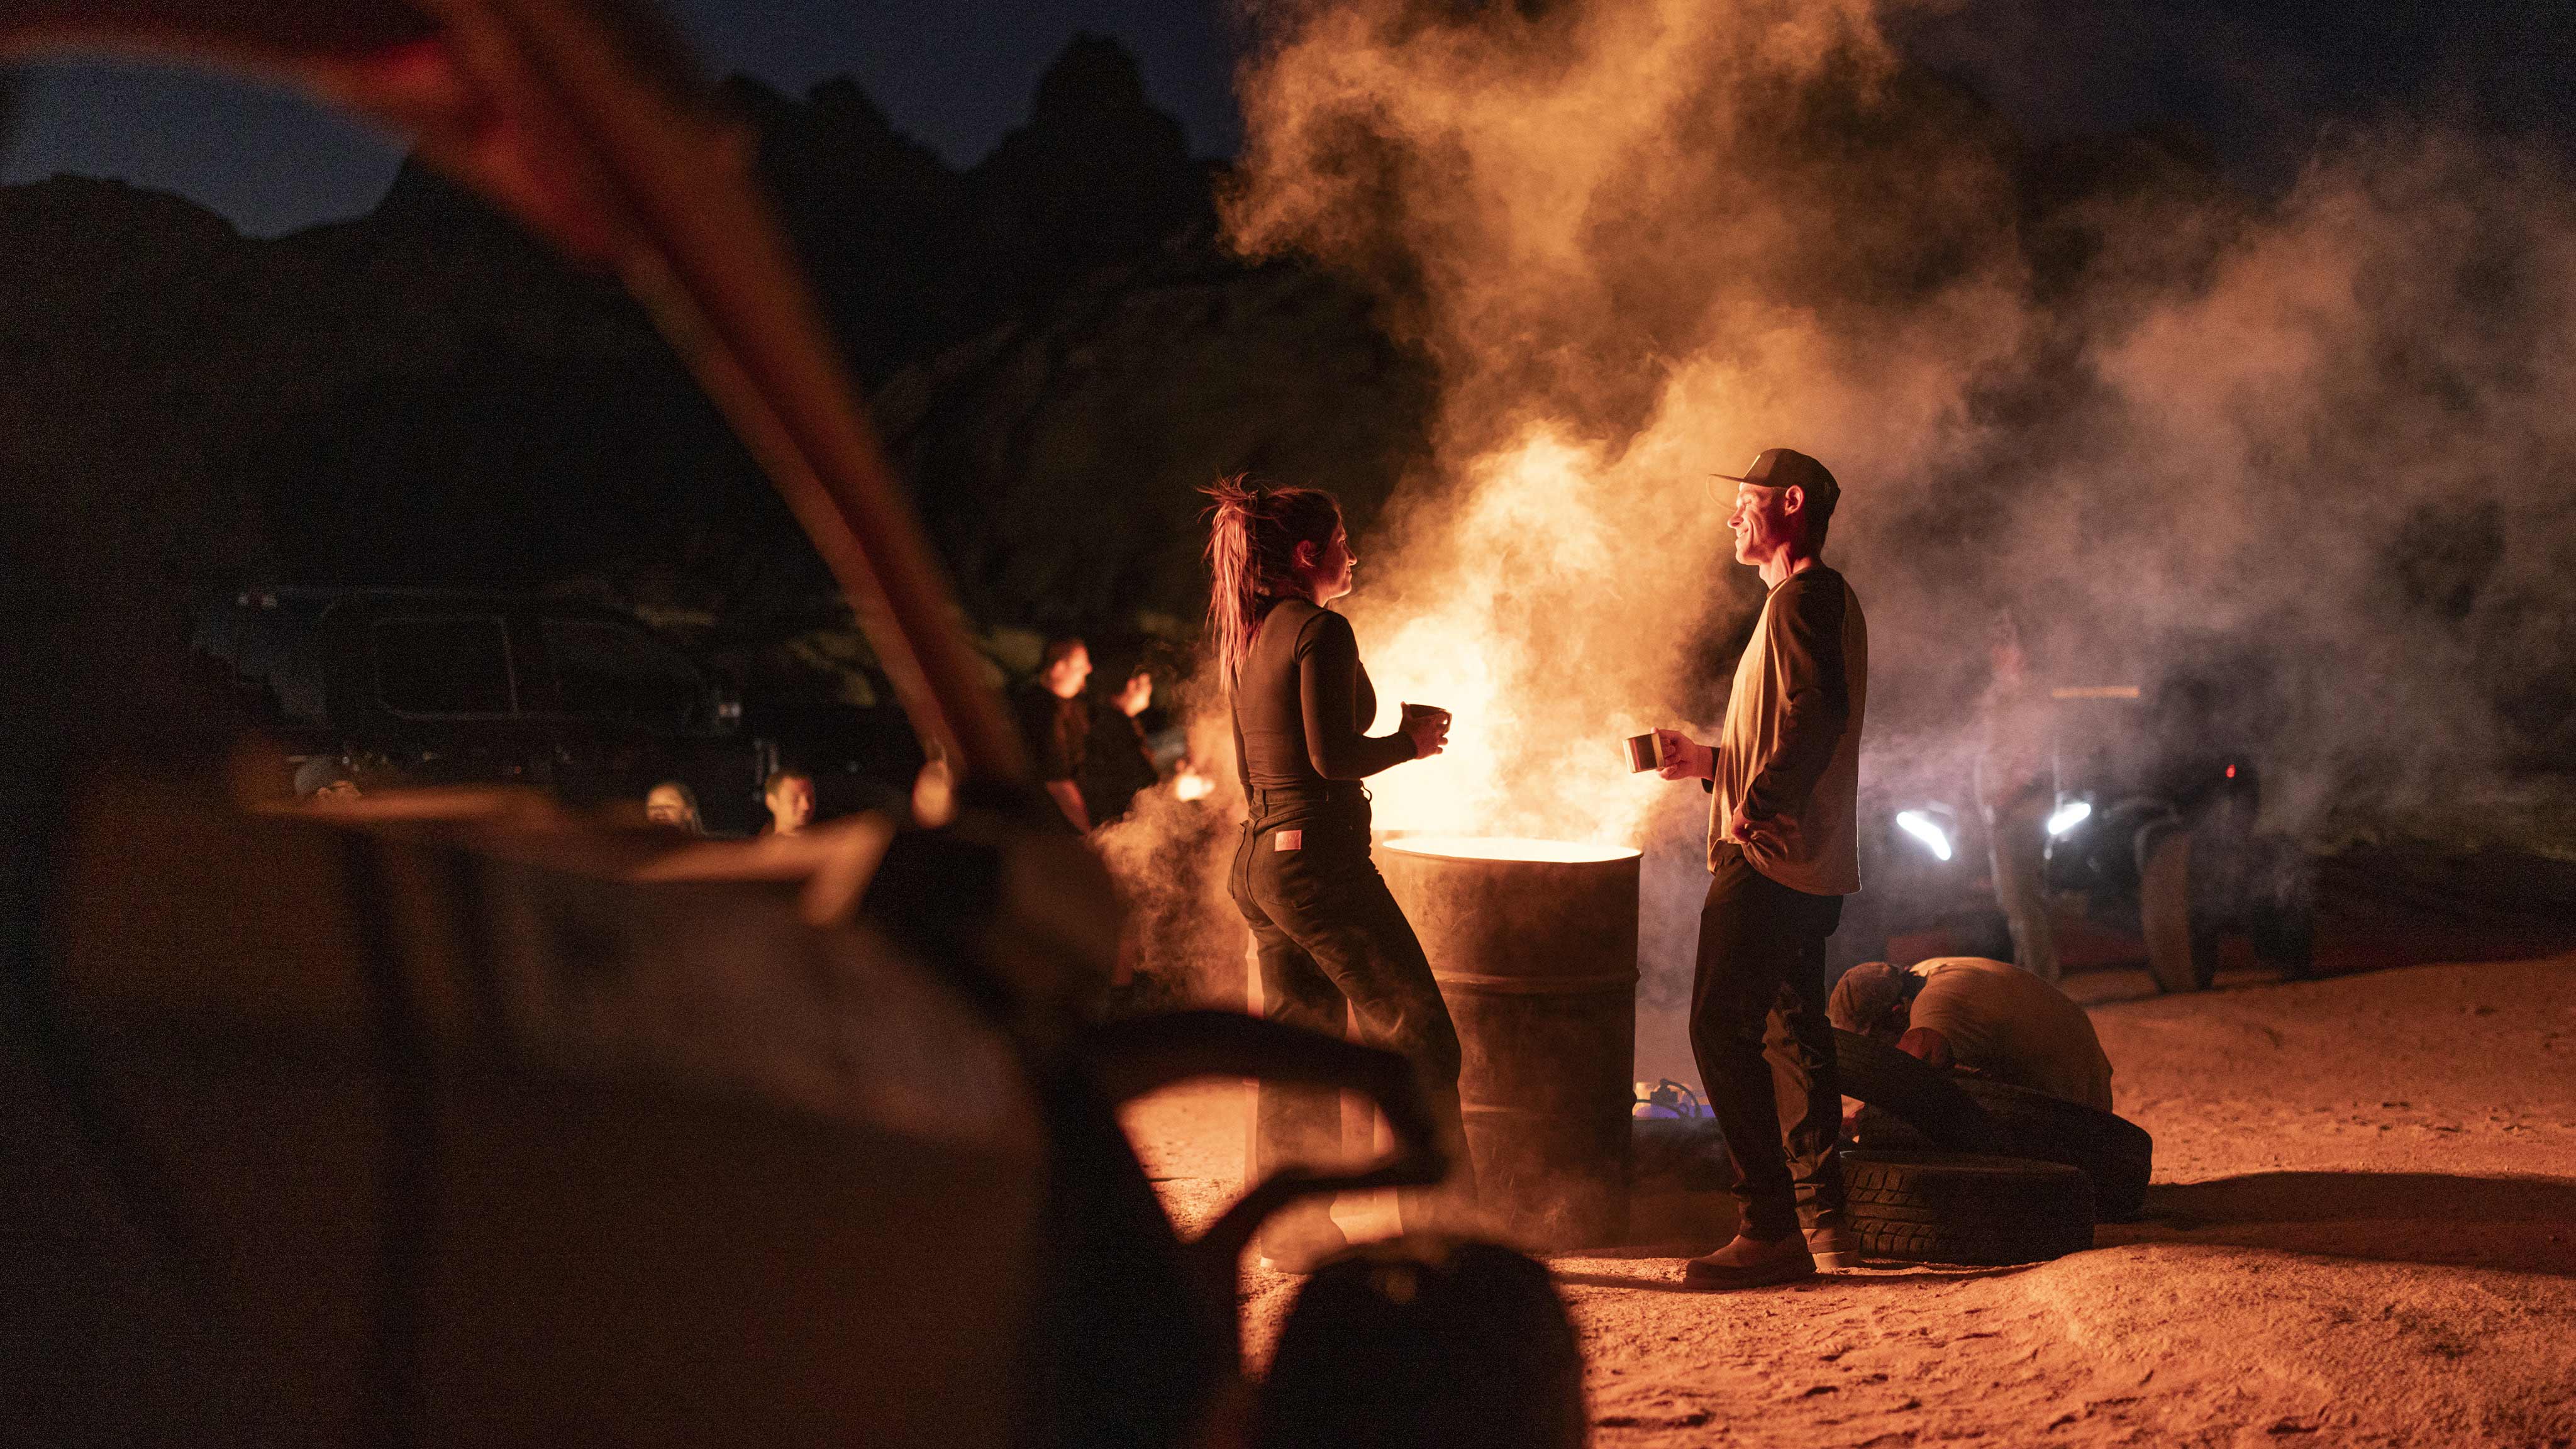 Two people chatting by a burn barrel in the desert at night with a Can-Am Maverick R in the foreground